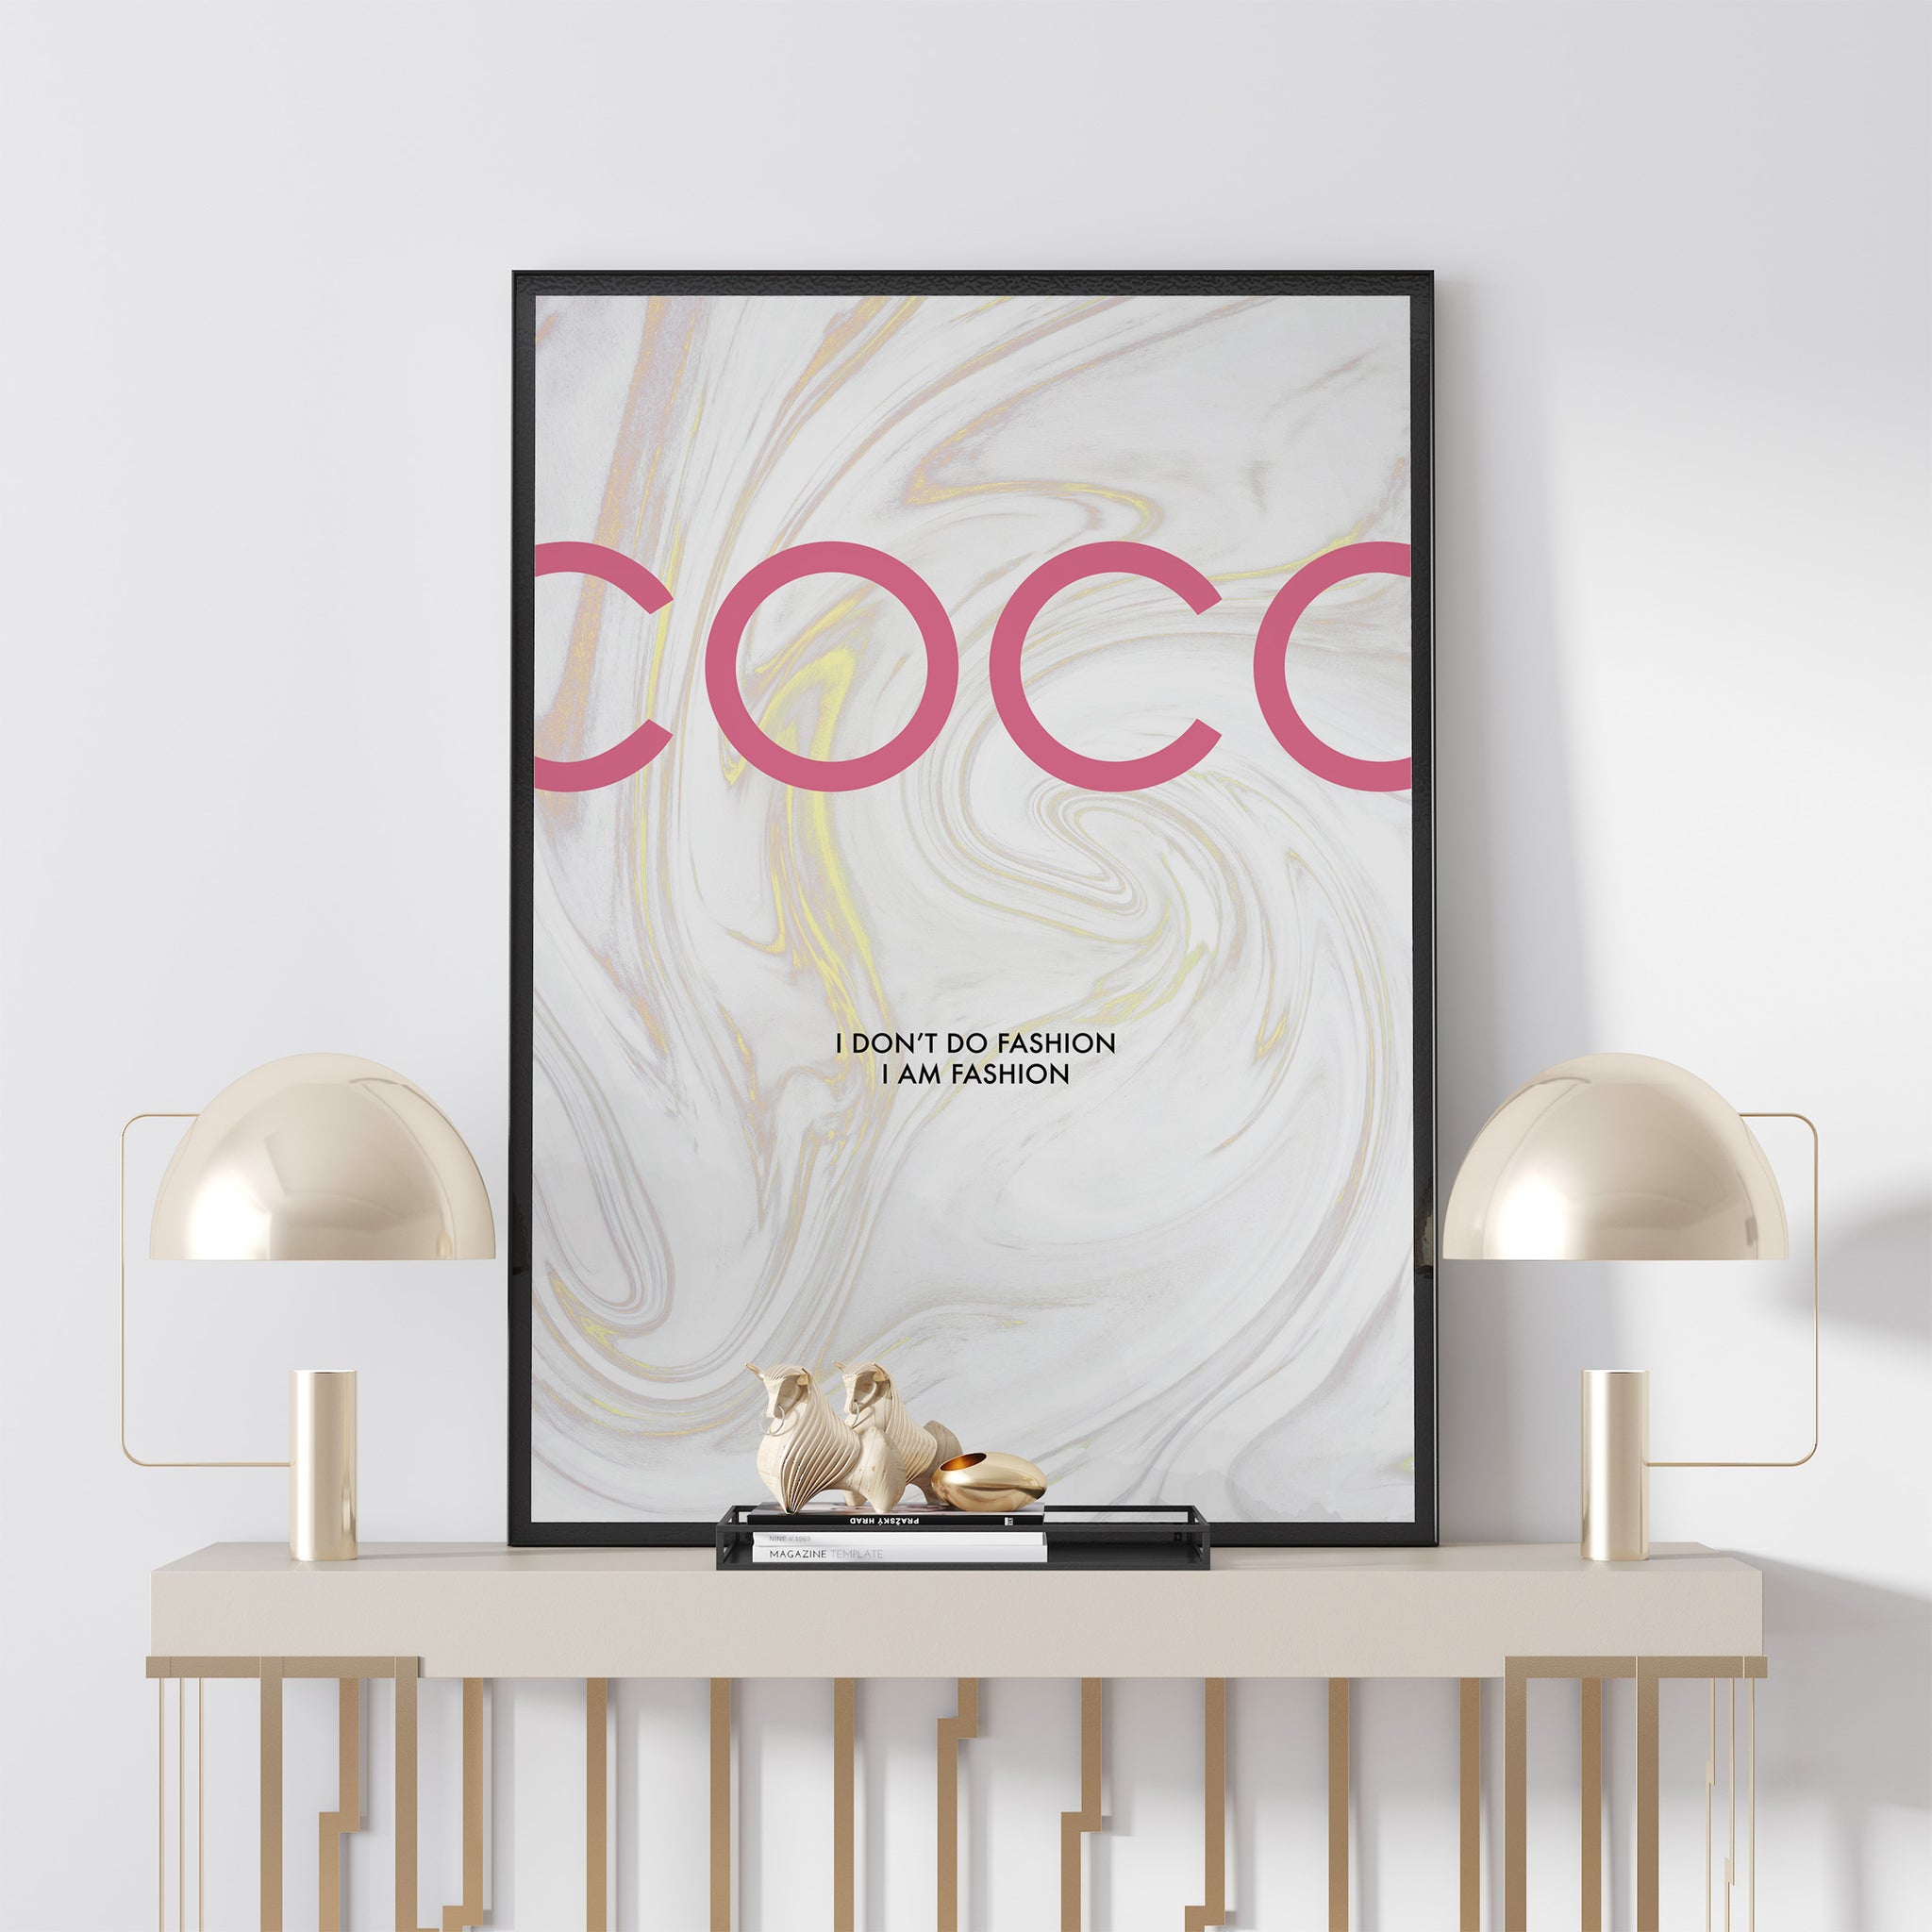 CoCo Quotes Posters Print Fashion Inspirational Saying Wall Art Canvas  Painting Vogue Motivational Letters Pictures Home Decor – Nordic Wall Decor